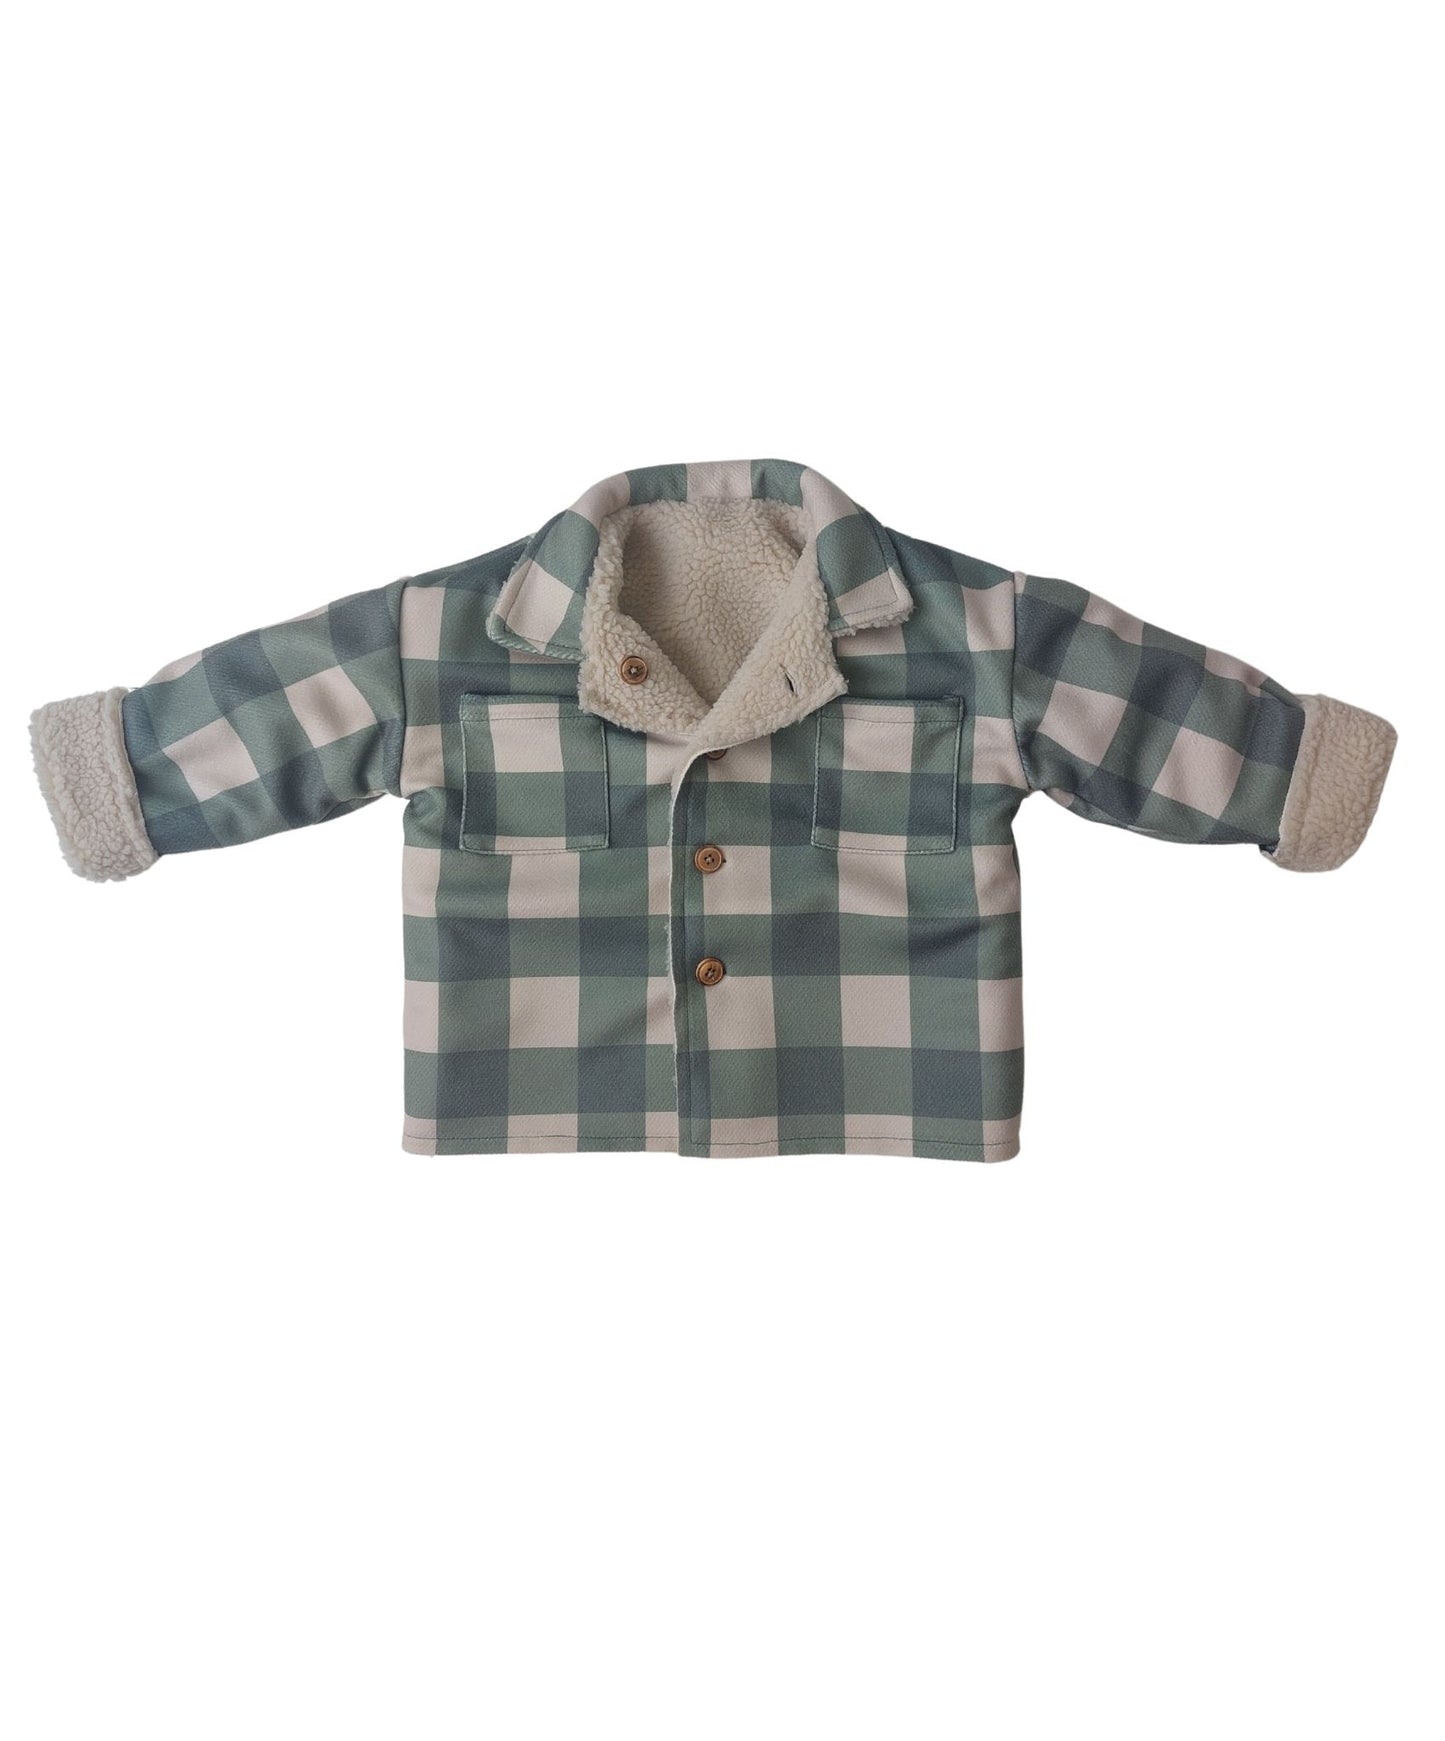 The Recycled Jacket - reversible